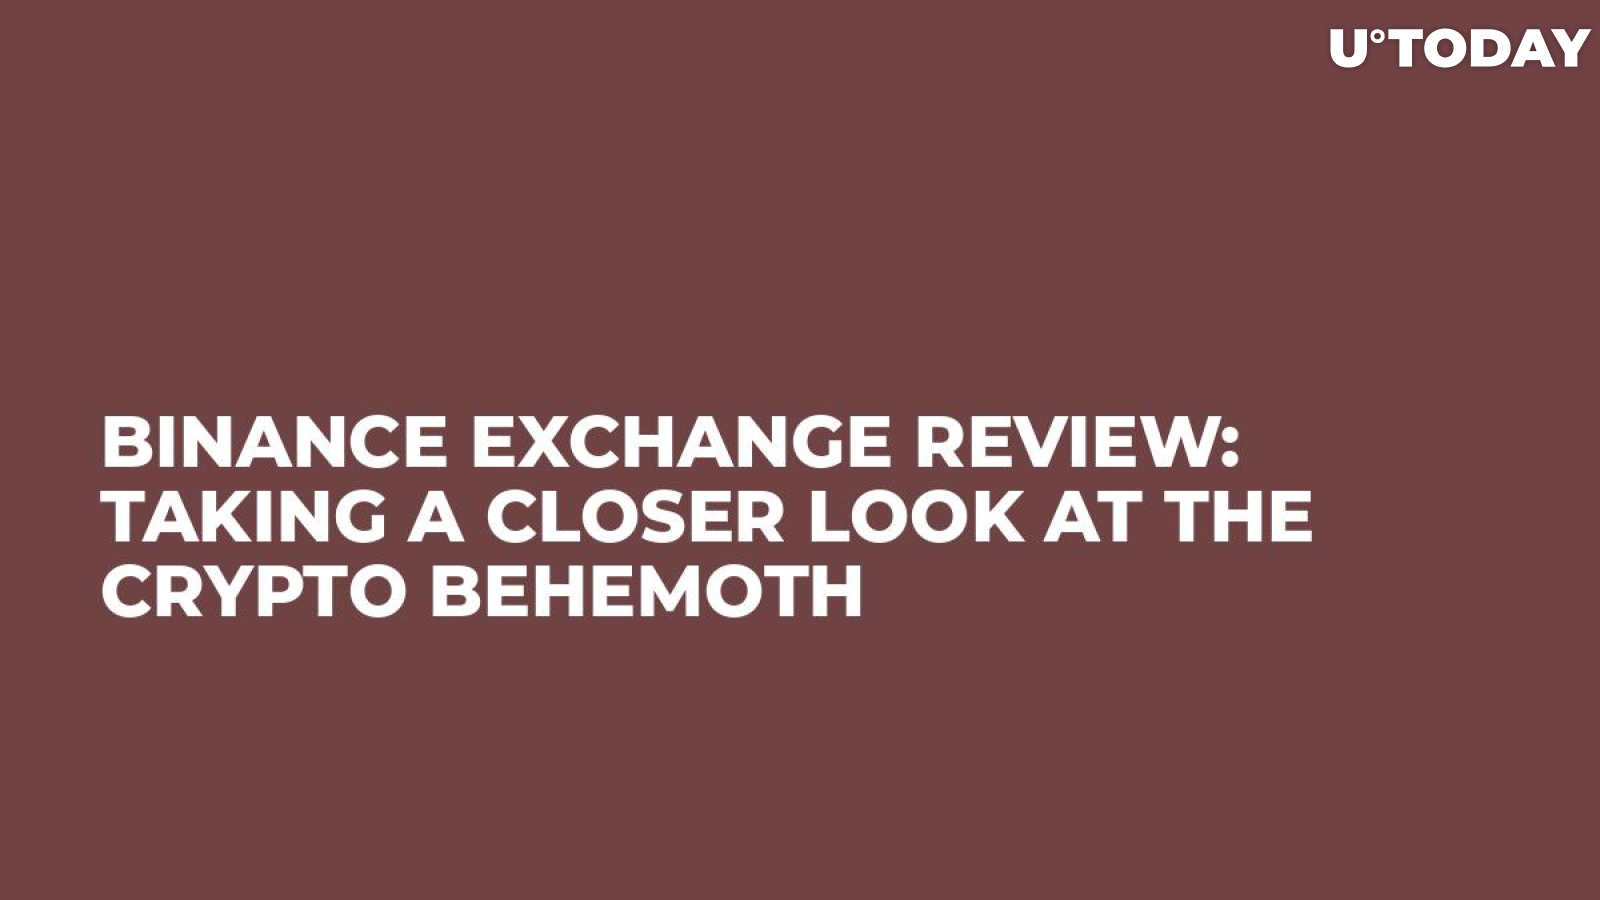 Binance Exchange Review: Taking a Closer Look at the Crypto Behemoth